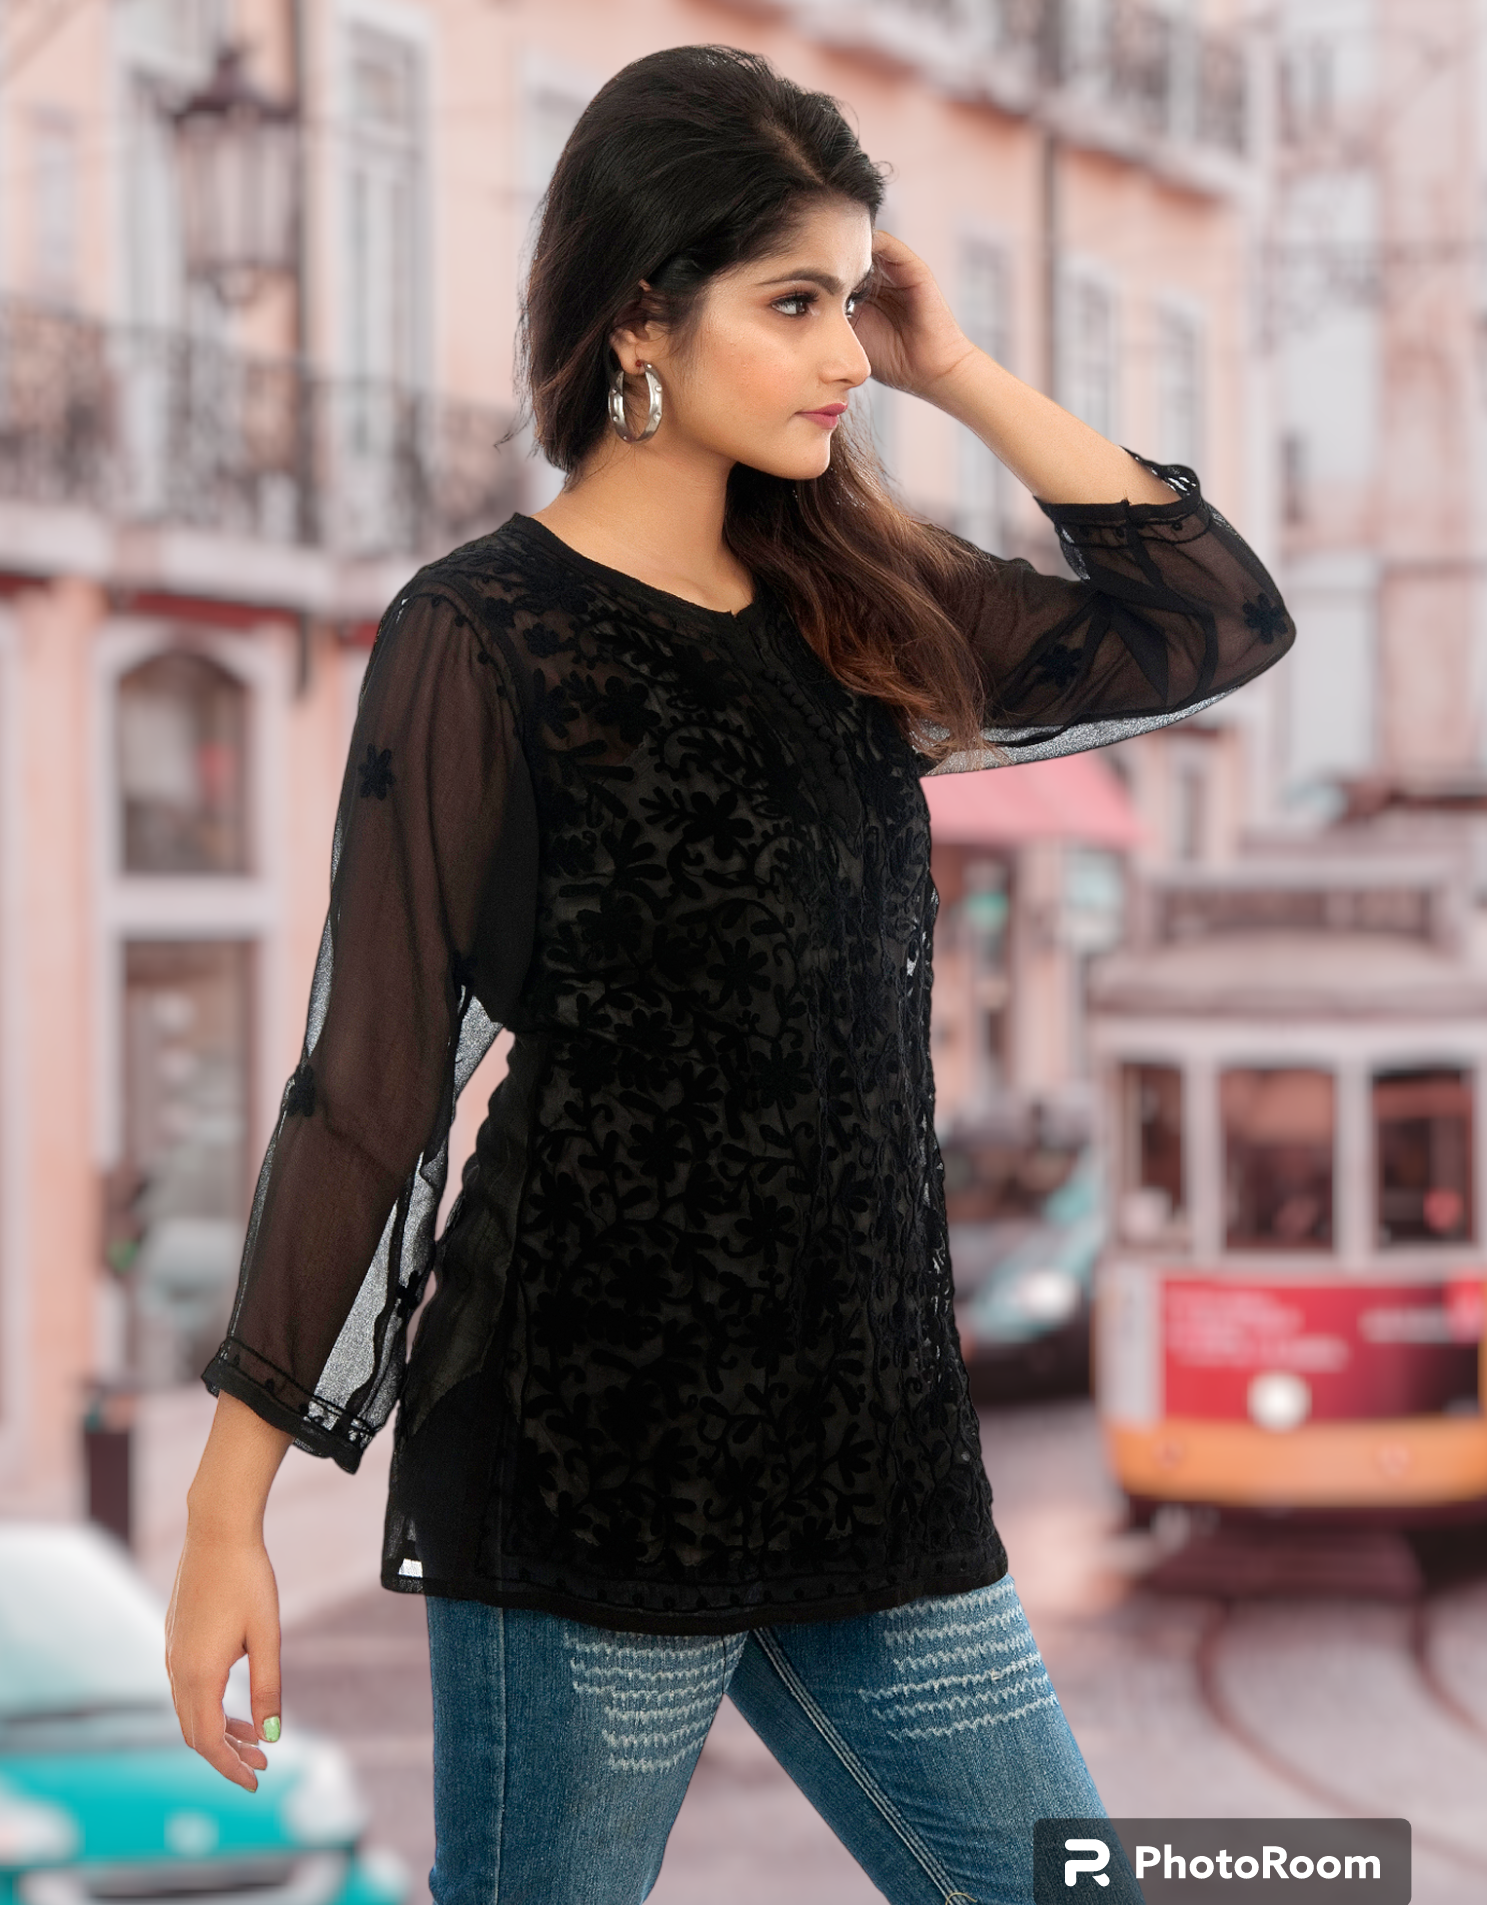 Black Short Kurti From Style With Fold Up Sleeves at Rs 440.00 in Chennai